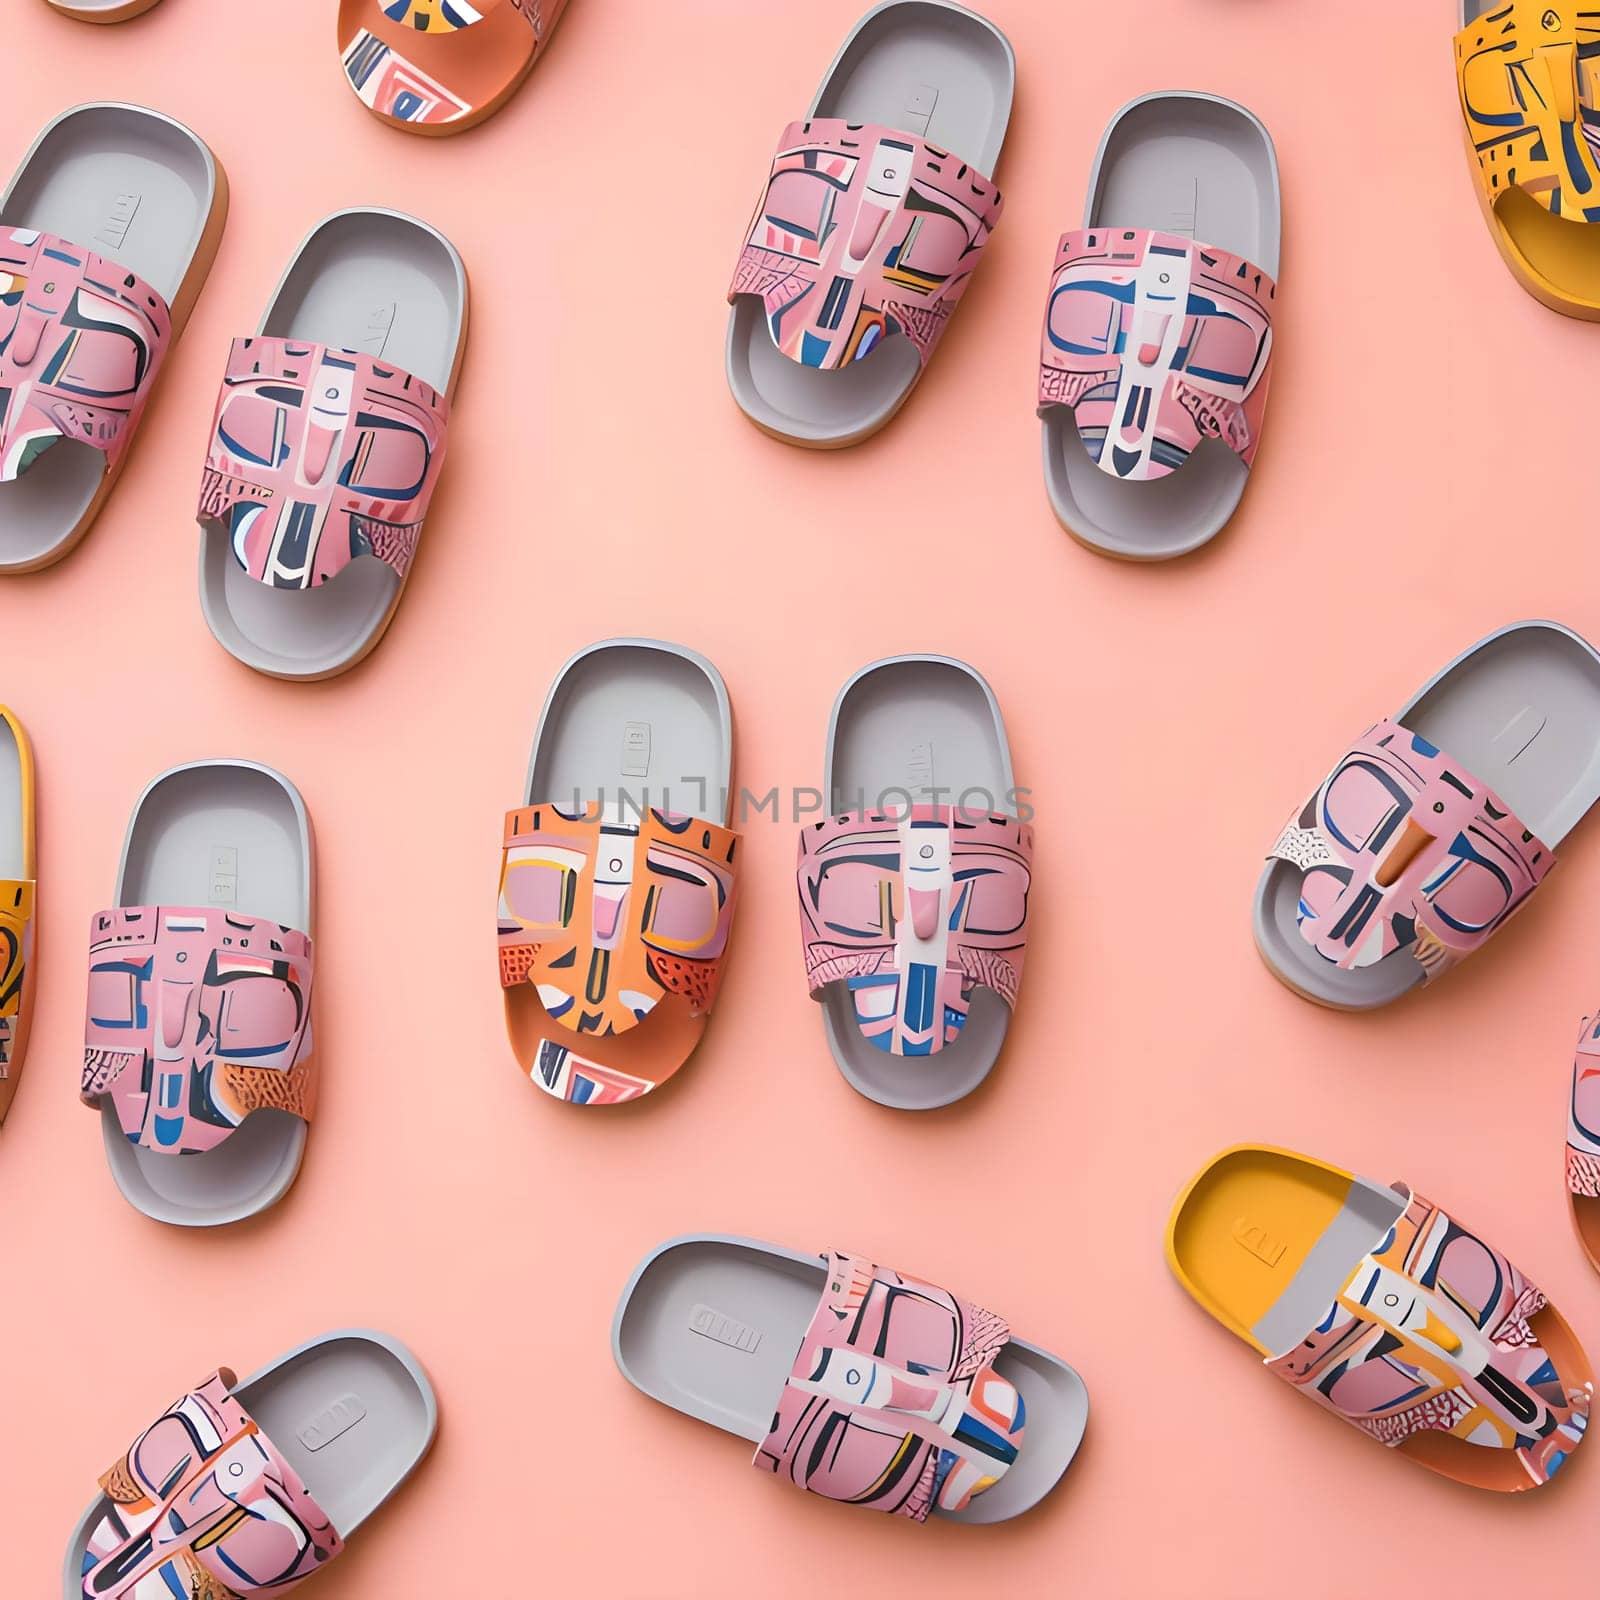 Patterns and banners backgrounds: Seamless pattern with children's shoes on a pink background.